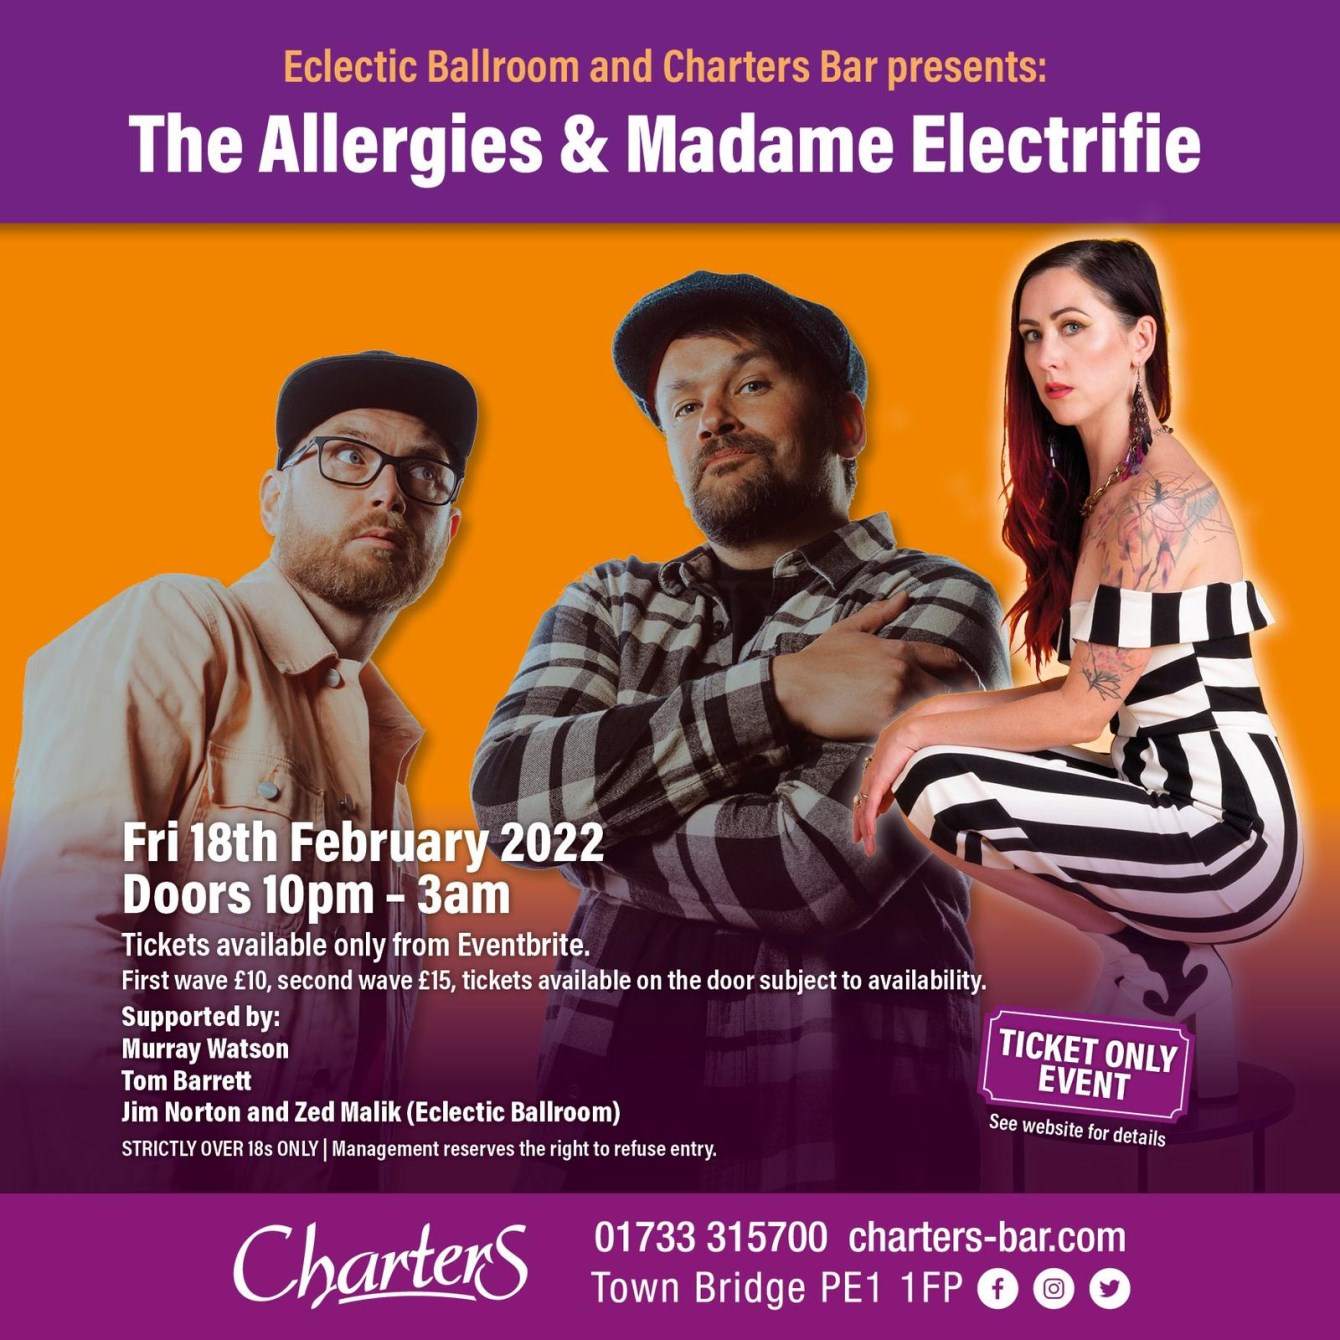 Eclectic Ballroom & Charters Bar present The Allergies and Madame Eclectrfie. - Página frontal